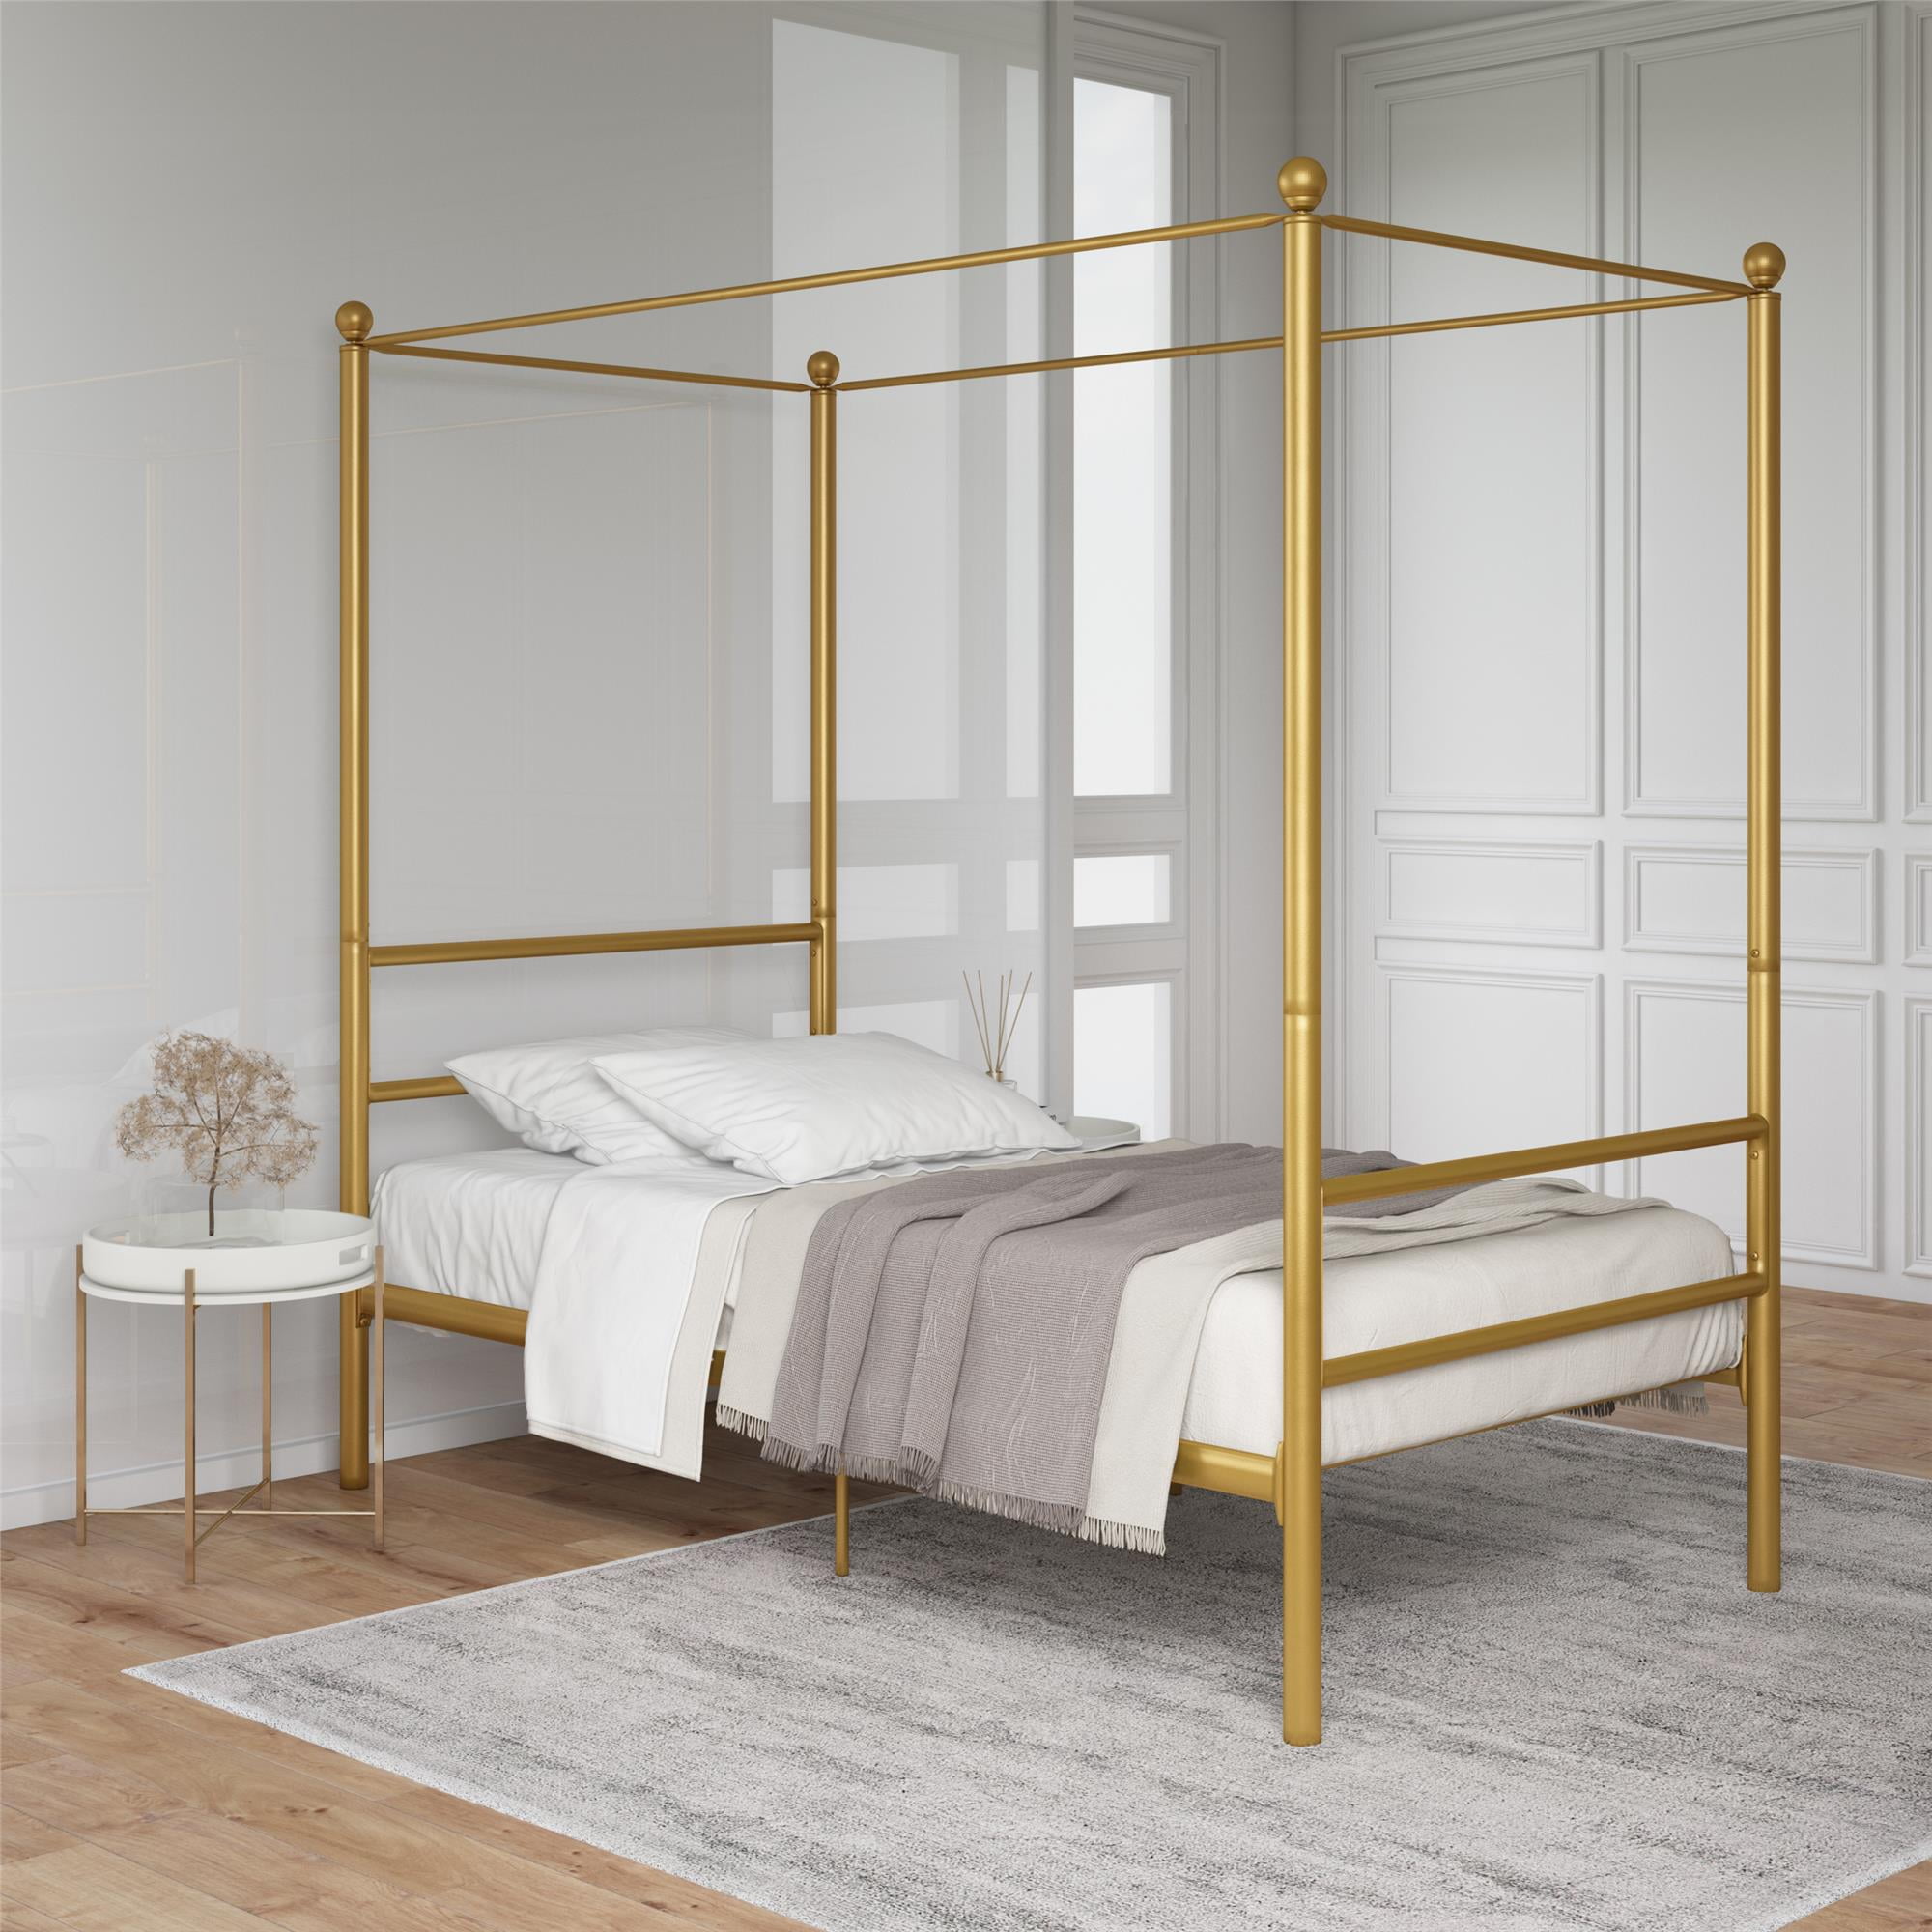 Mainstays Canopy Bed Twin Gold Metal, Canopy For Twin Bed Boy